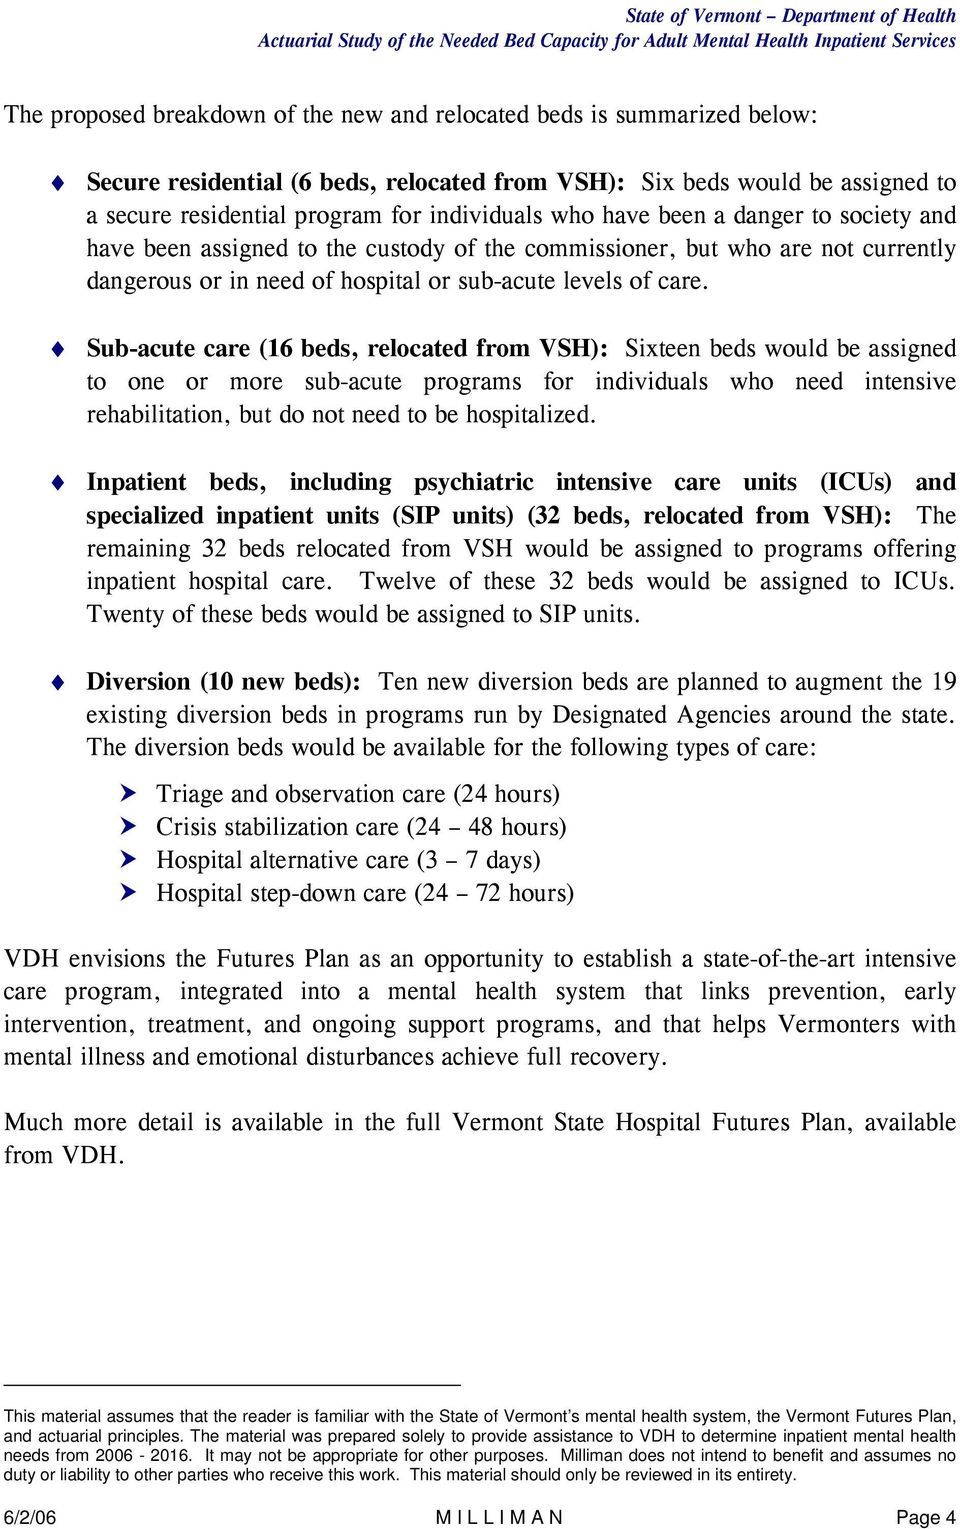 Sub-acute care (16 beds, relocated from VSH): Sixteen beds would be assigned to one or more sub-acute programs for individuals who need intensive rehabilitation, but do not need to be hospitalized.